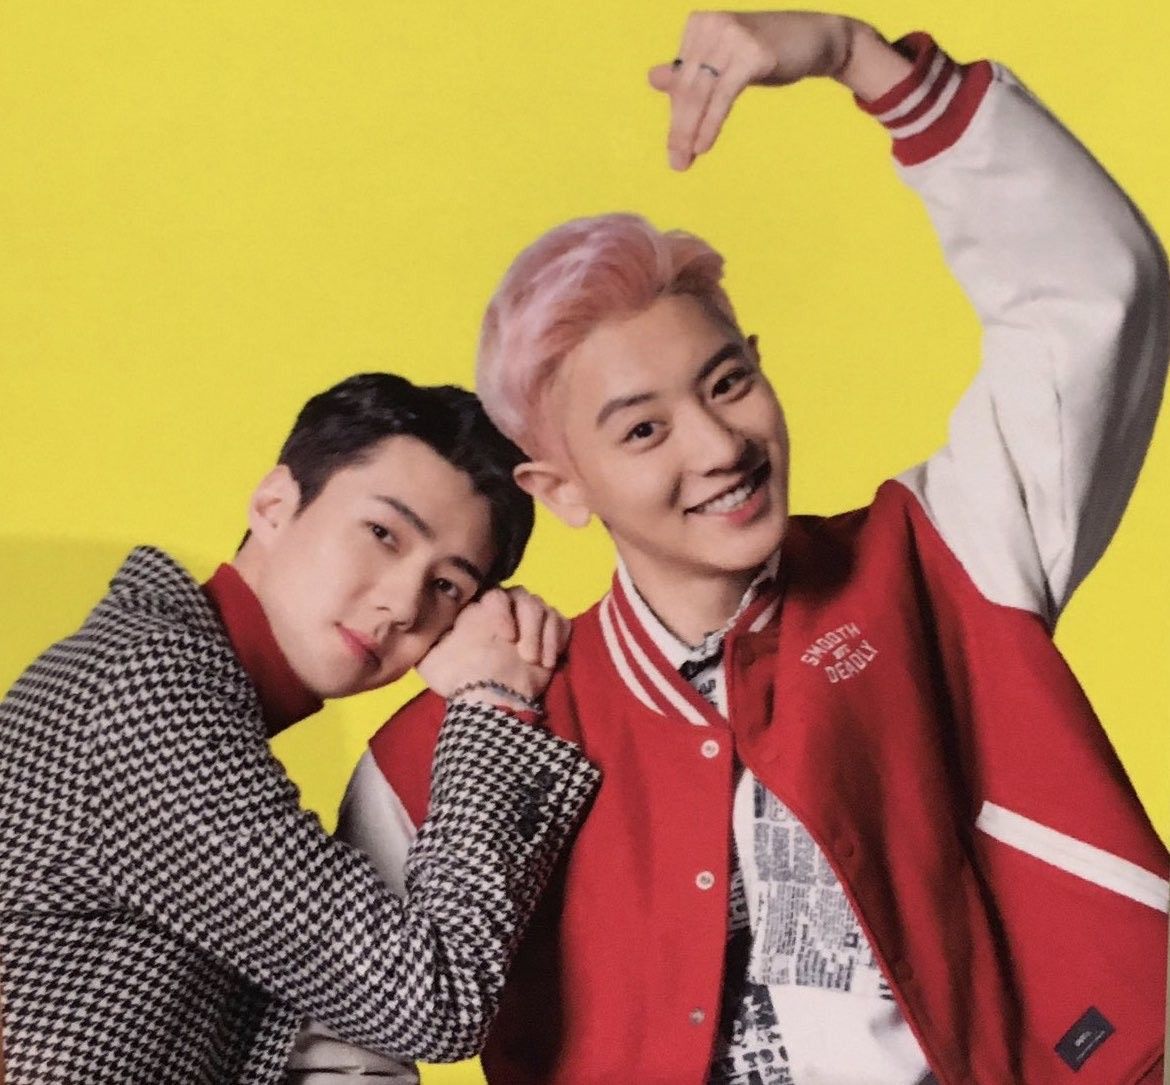 exo-sc-to-complete-recording-1-billion-views-for-their-comeback-1